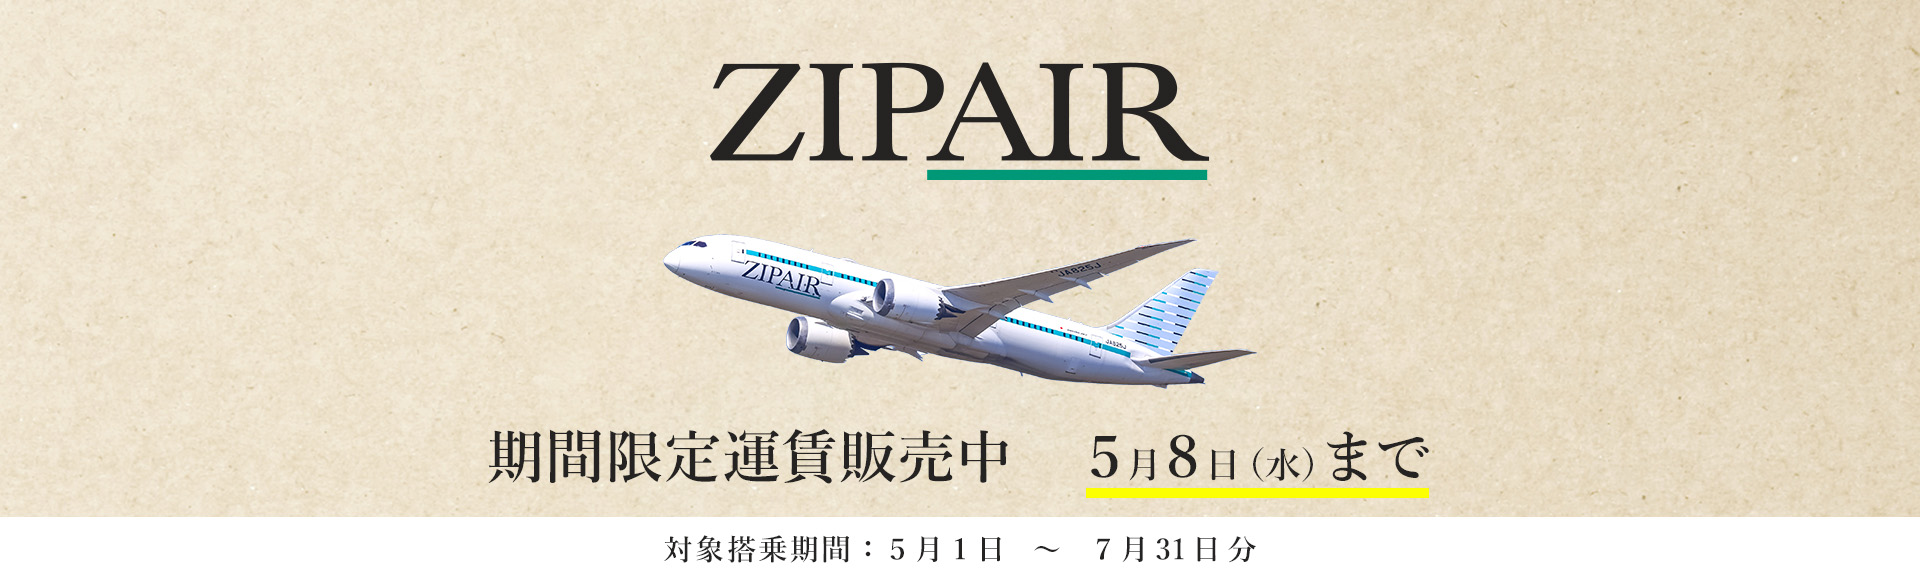 LIMITED TIME SALE - ZIPAIR Tokyo